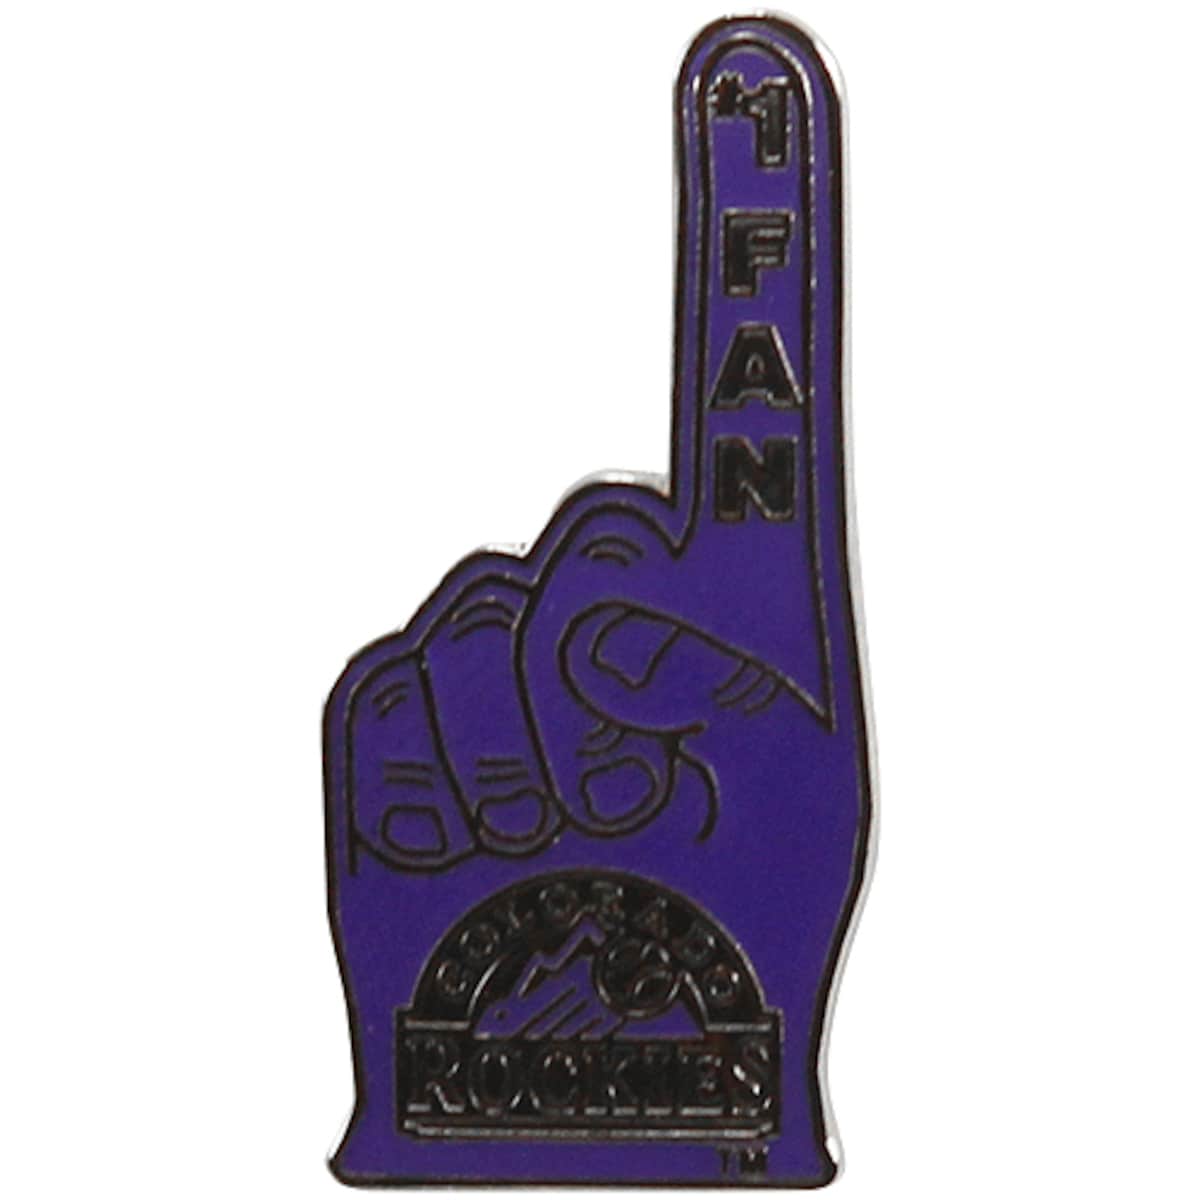 Bring a touch of Colorado pride to your outfit with this handsome team pin from WinCraft. Vibrant enameled graphics won't fade-just like your Rockies fervor! The pin fastens securely at the back and the small size makes a great, subtle addition to lapels and hats. Friends and fans alike will love this classic expression of Colorado spirit!Officially licensedEnamel logo with vibrant team color accentsMaterial: 100% MetalMeasures approximately 1.5" x 1.5"Post-back pin with butterfly claspMade of metal alloyBrand: WinCraftMade in the USAImported